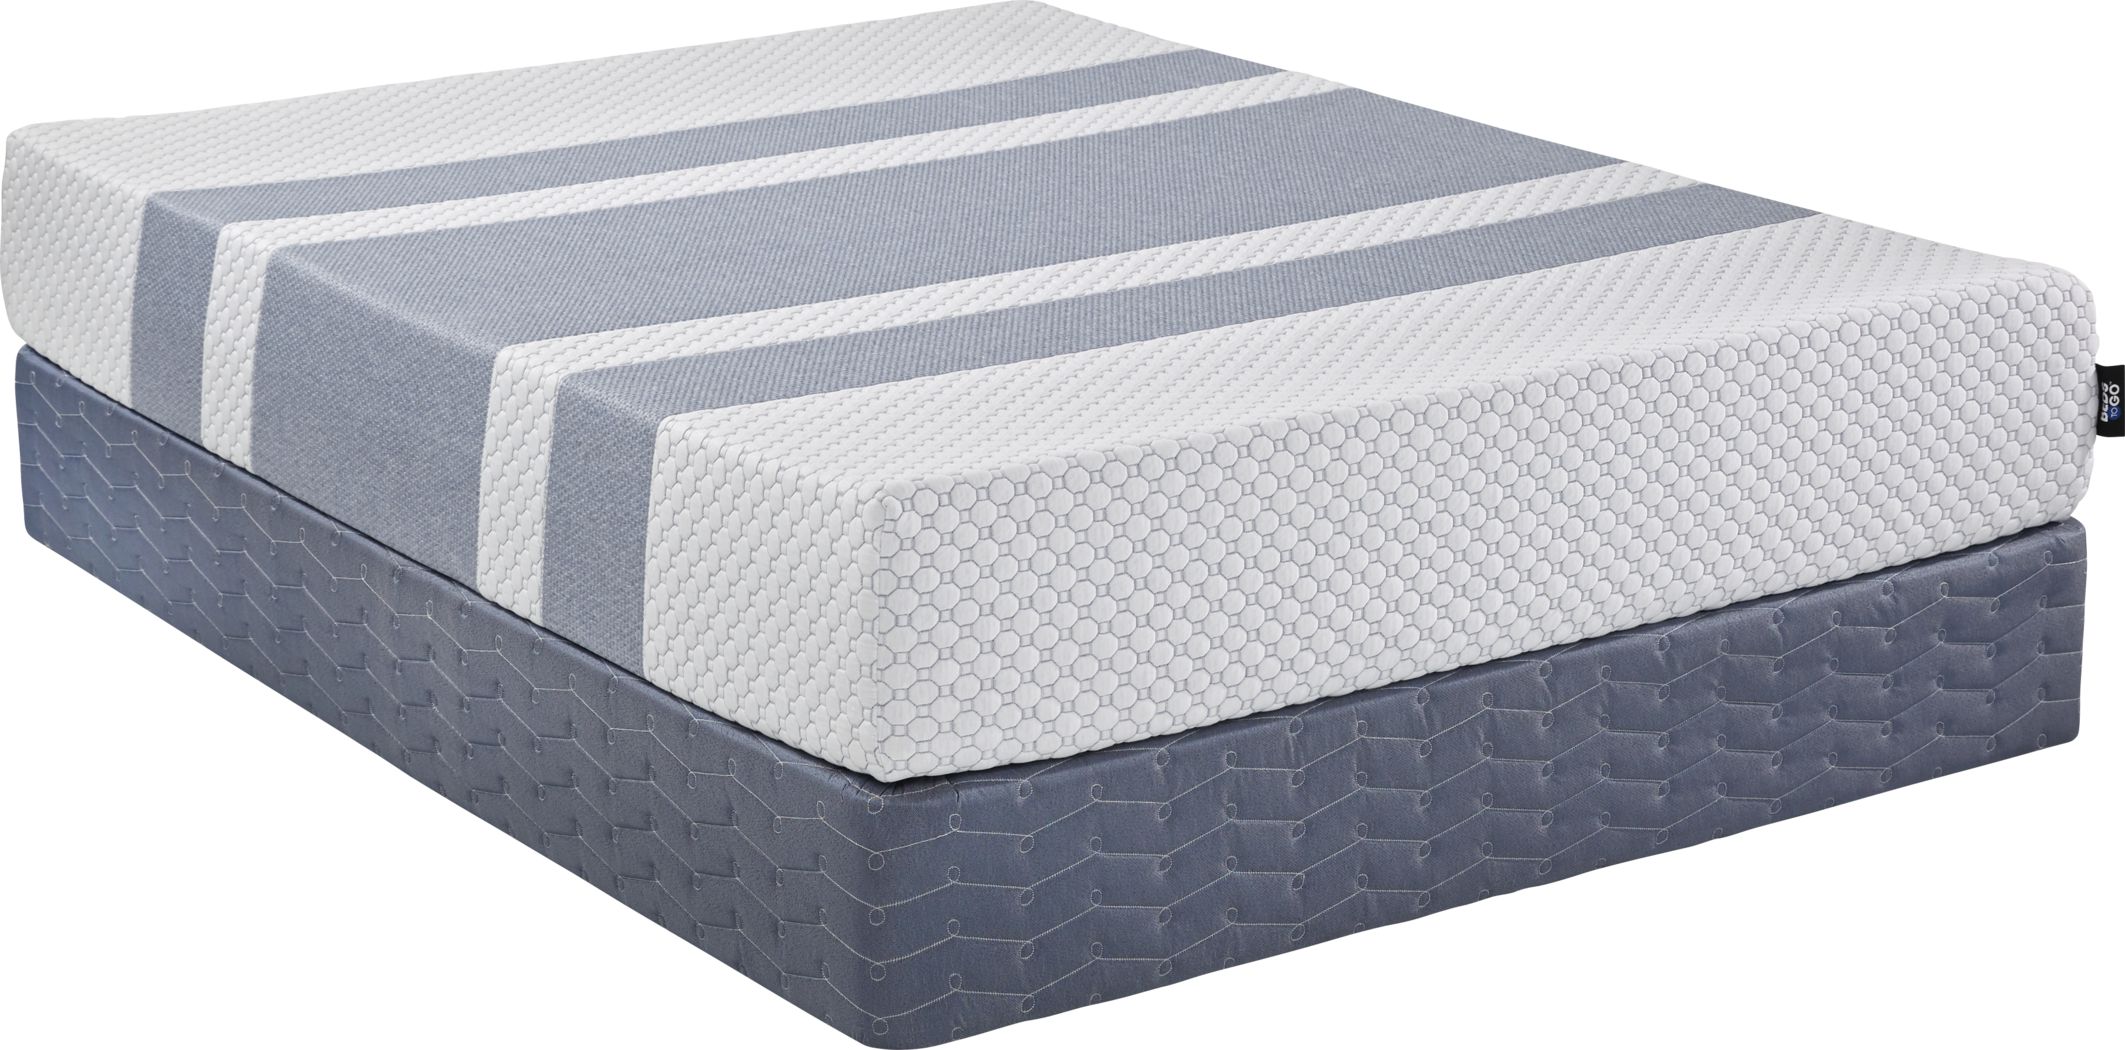 rooms to go atopedic mattress full size